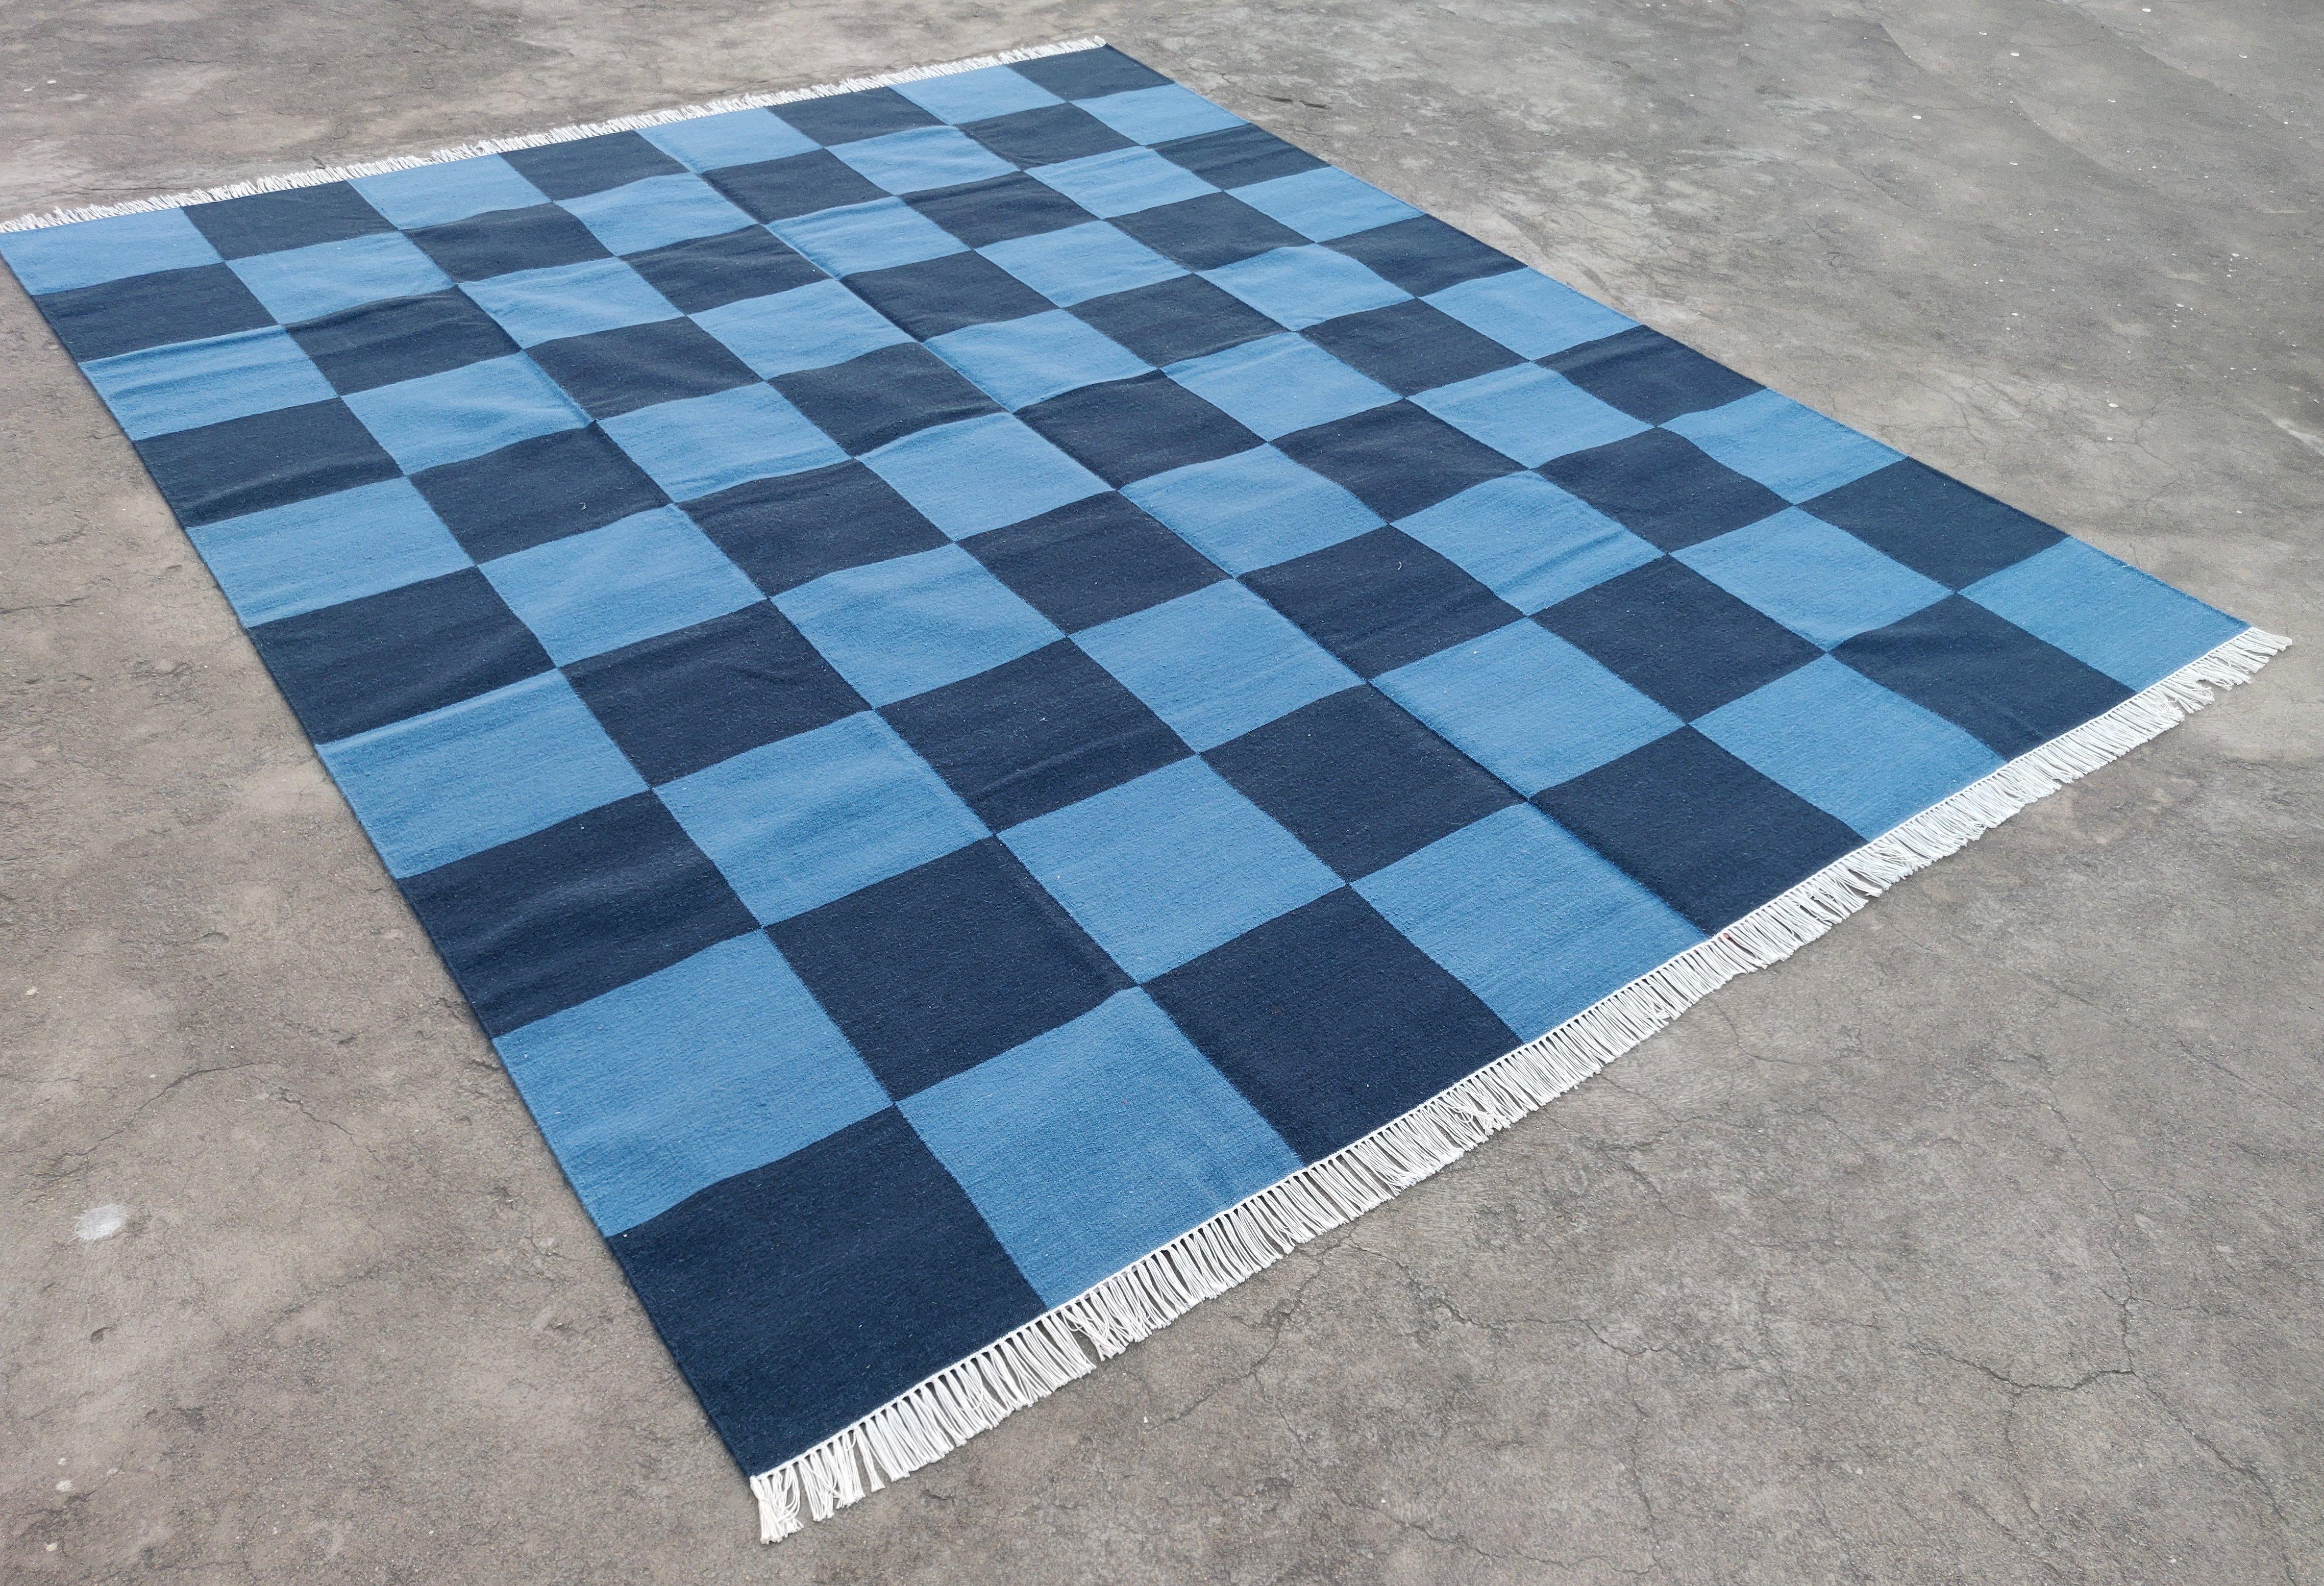 New Zealand Wool Vegetable Dyed Indigo Blue And Sky Blue Checked Indian Dhurrie Rug-8'x10' 
These special flat-weave dhurries are hand-woven with 15 ply 100% cotton yarn. Due to the special manufacturing techniques used to create our rugs, the size